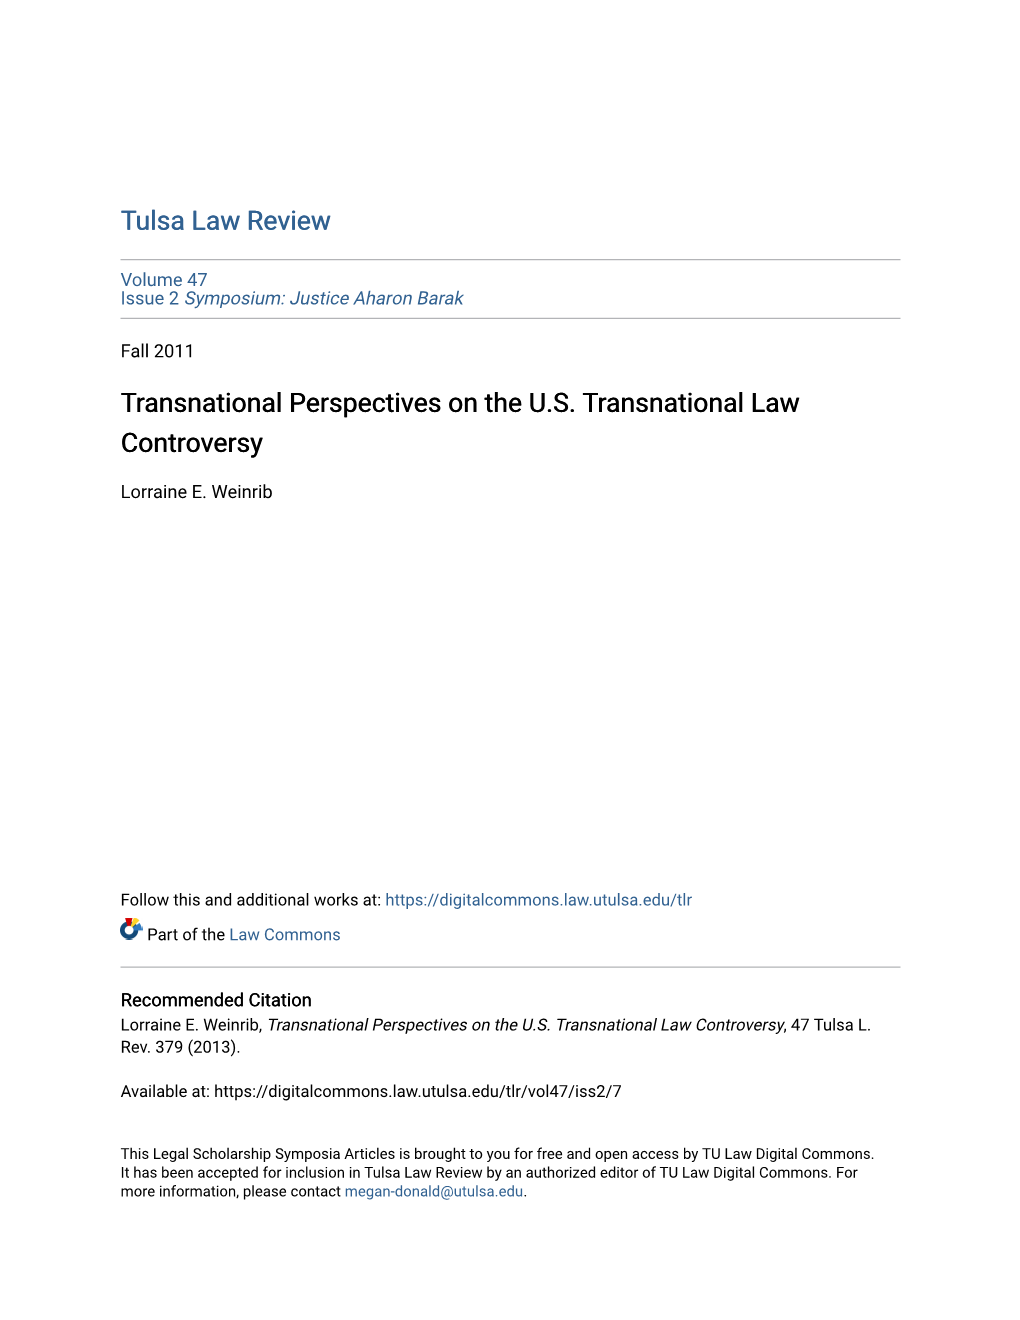 Transnational Perspectives on the U.S. Transnational Law Controversy